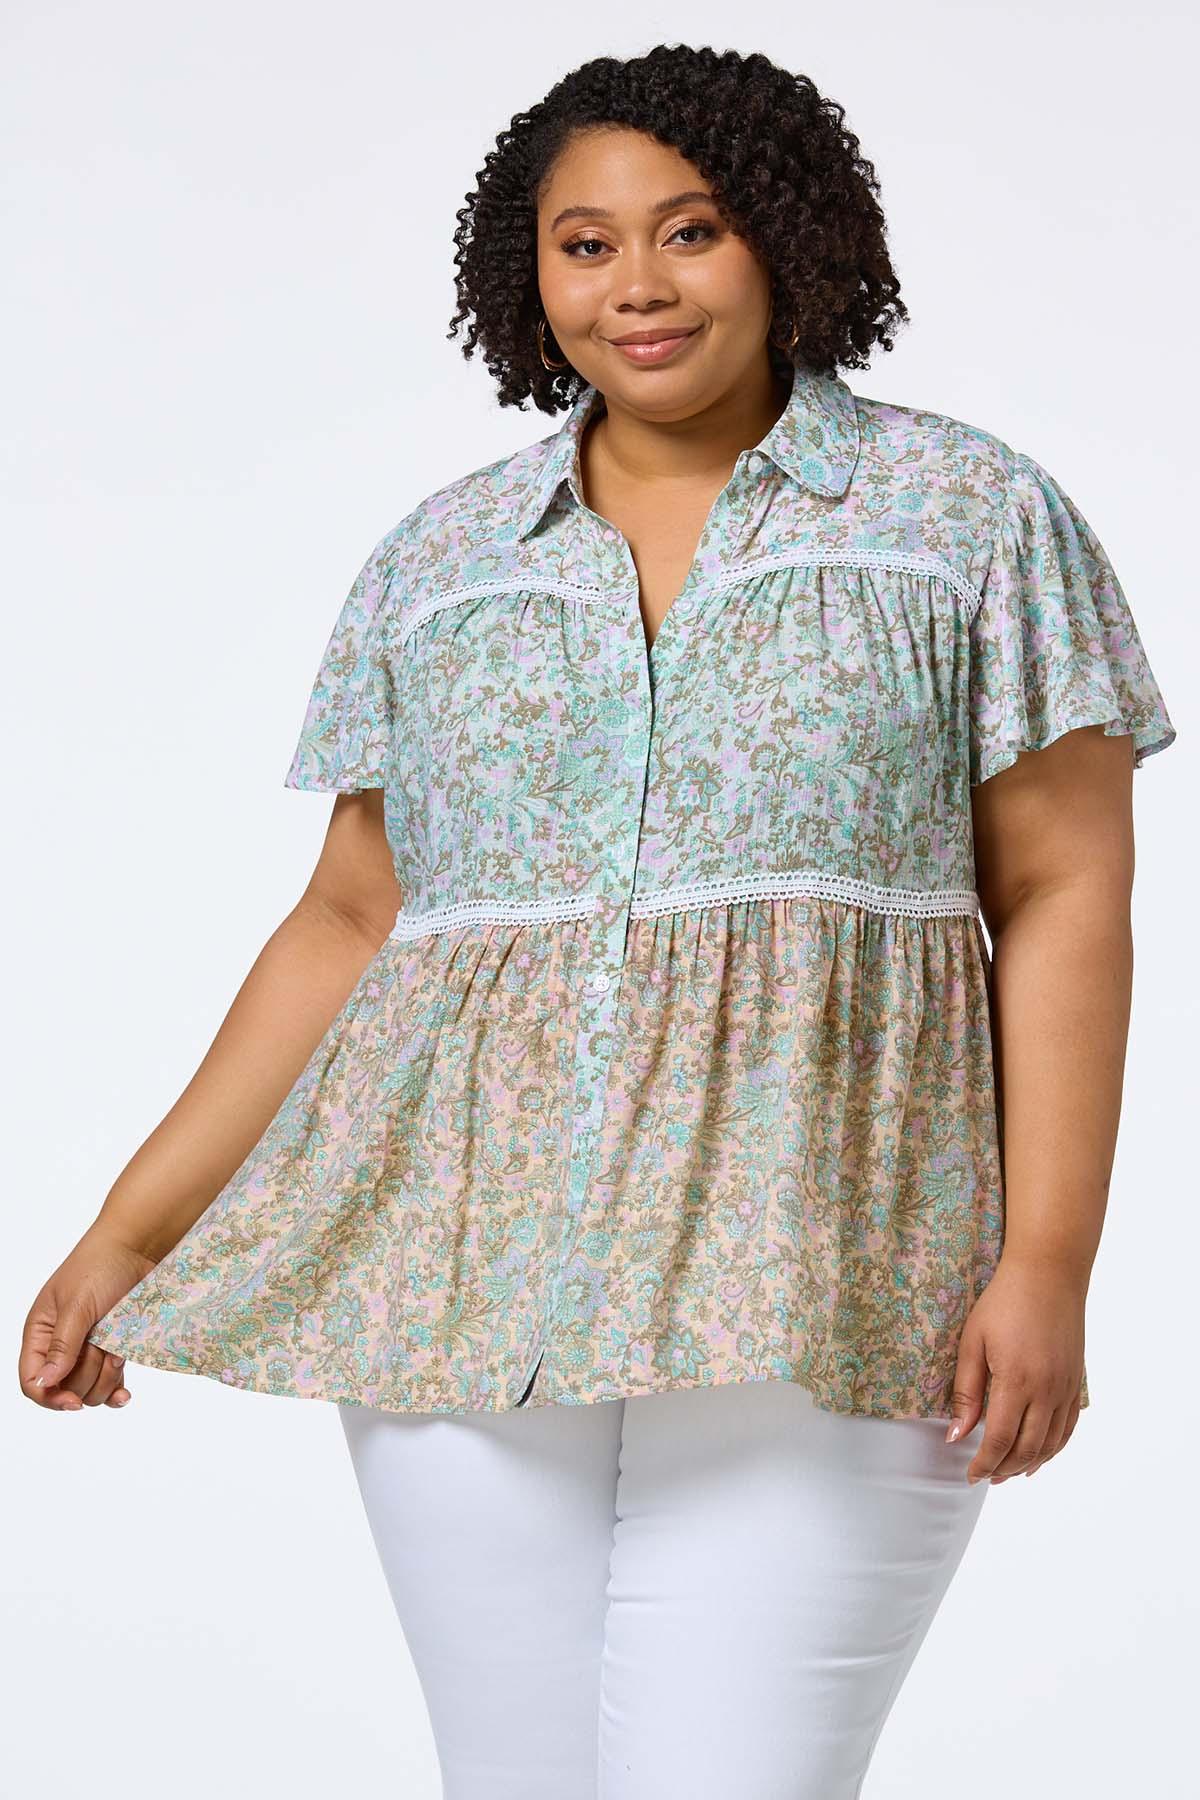 Cato Fashions  Cato Plus Size Tiered Floral Lace Shirt